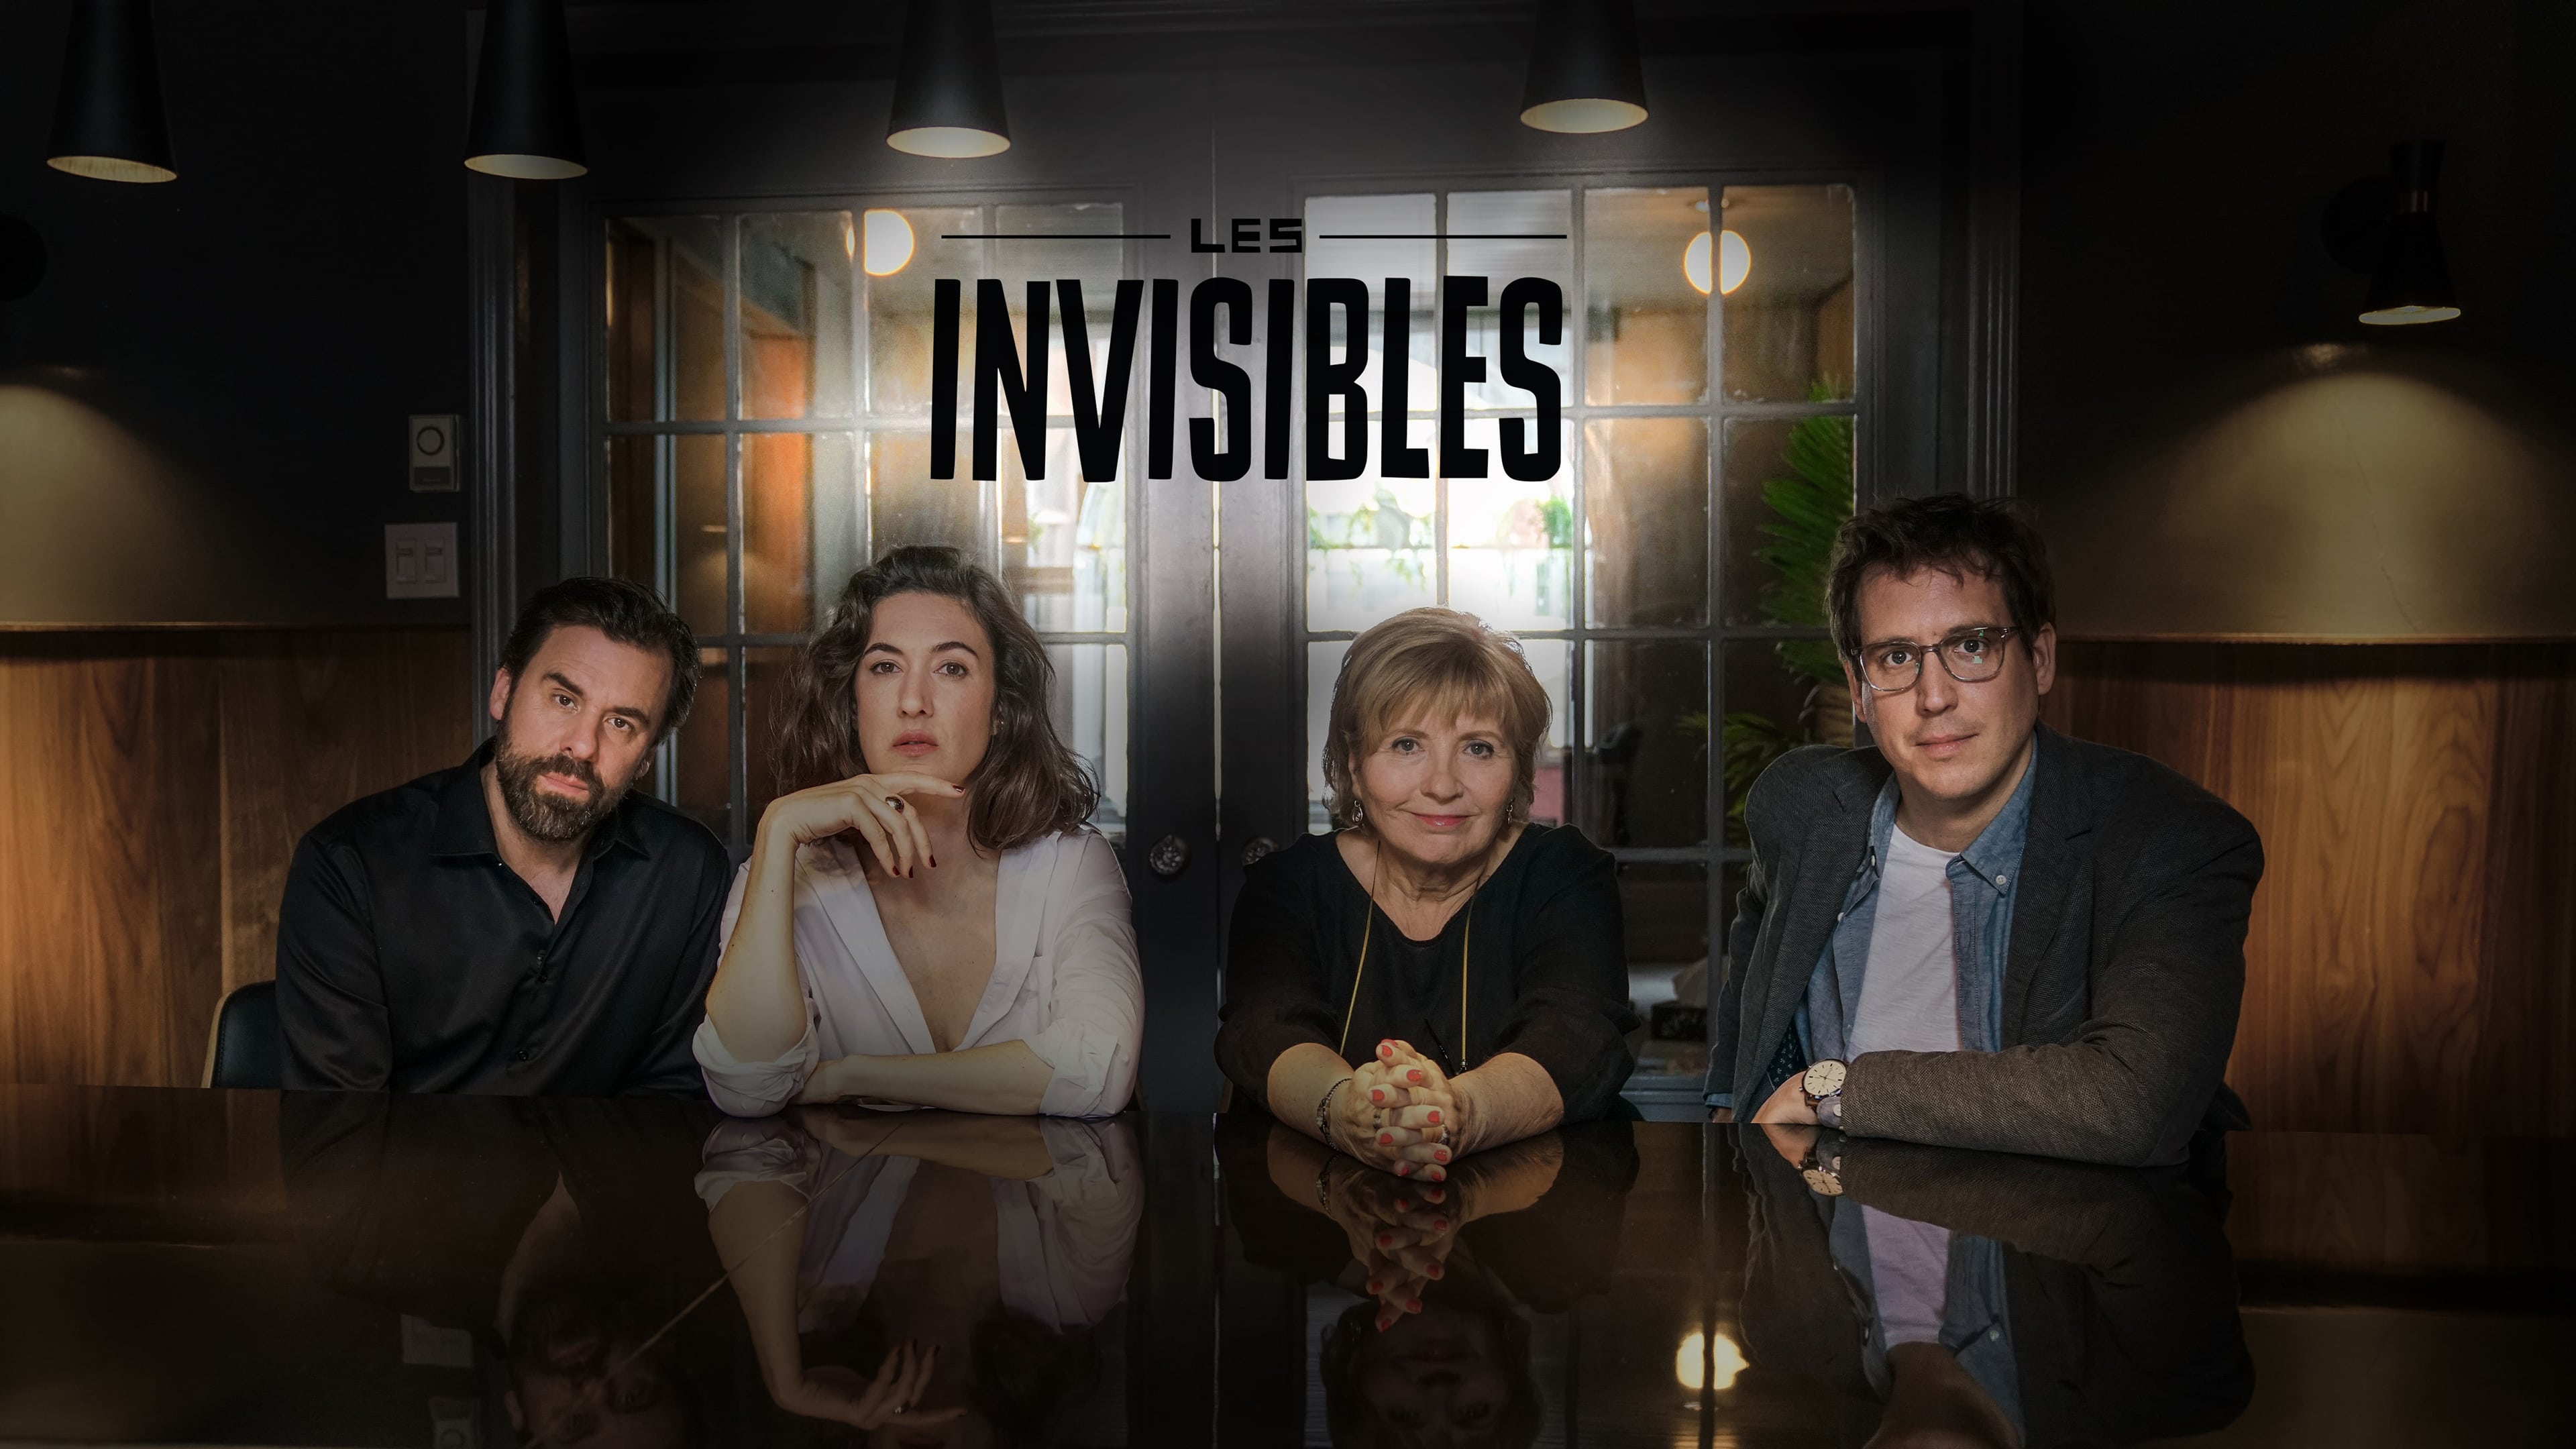 les invisibles 2019hd.avi french a telecharger